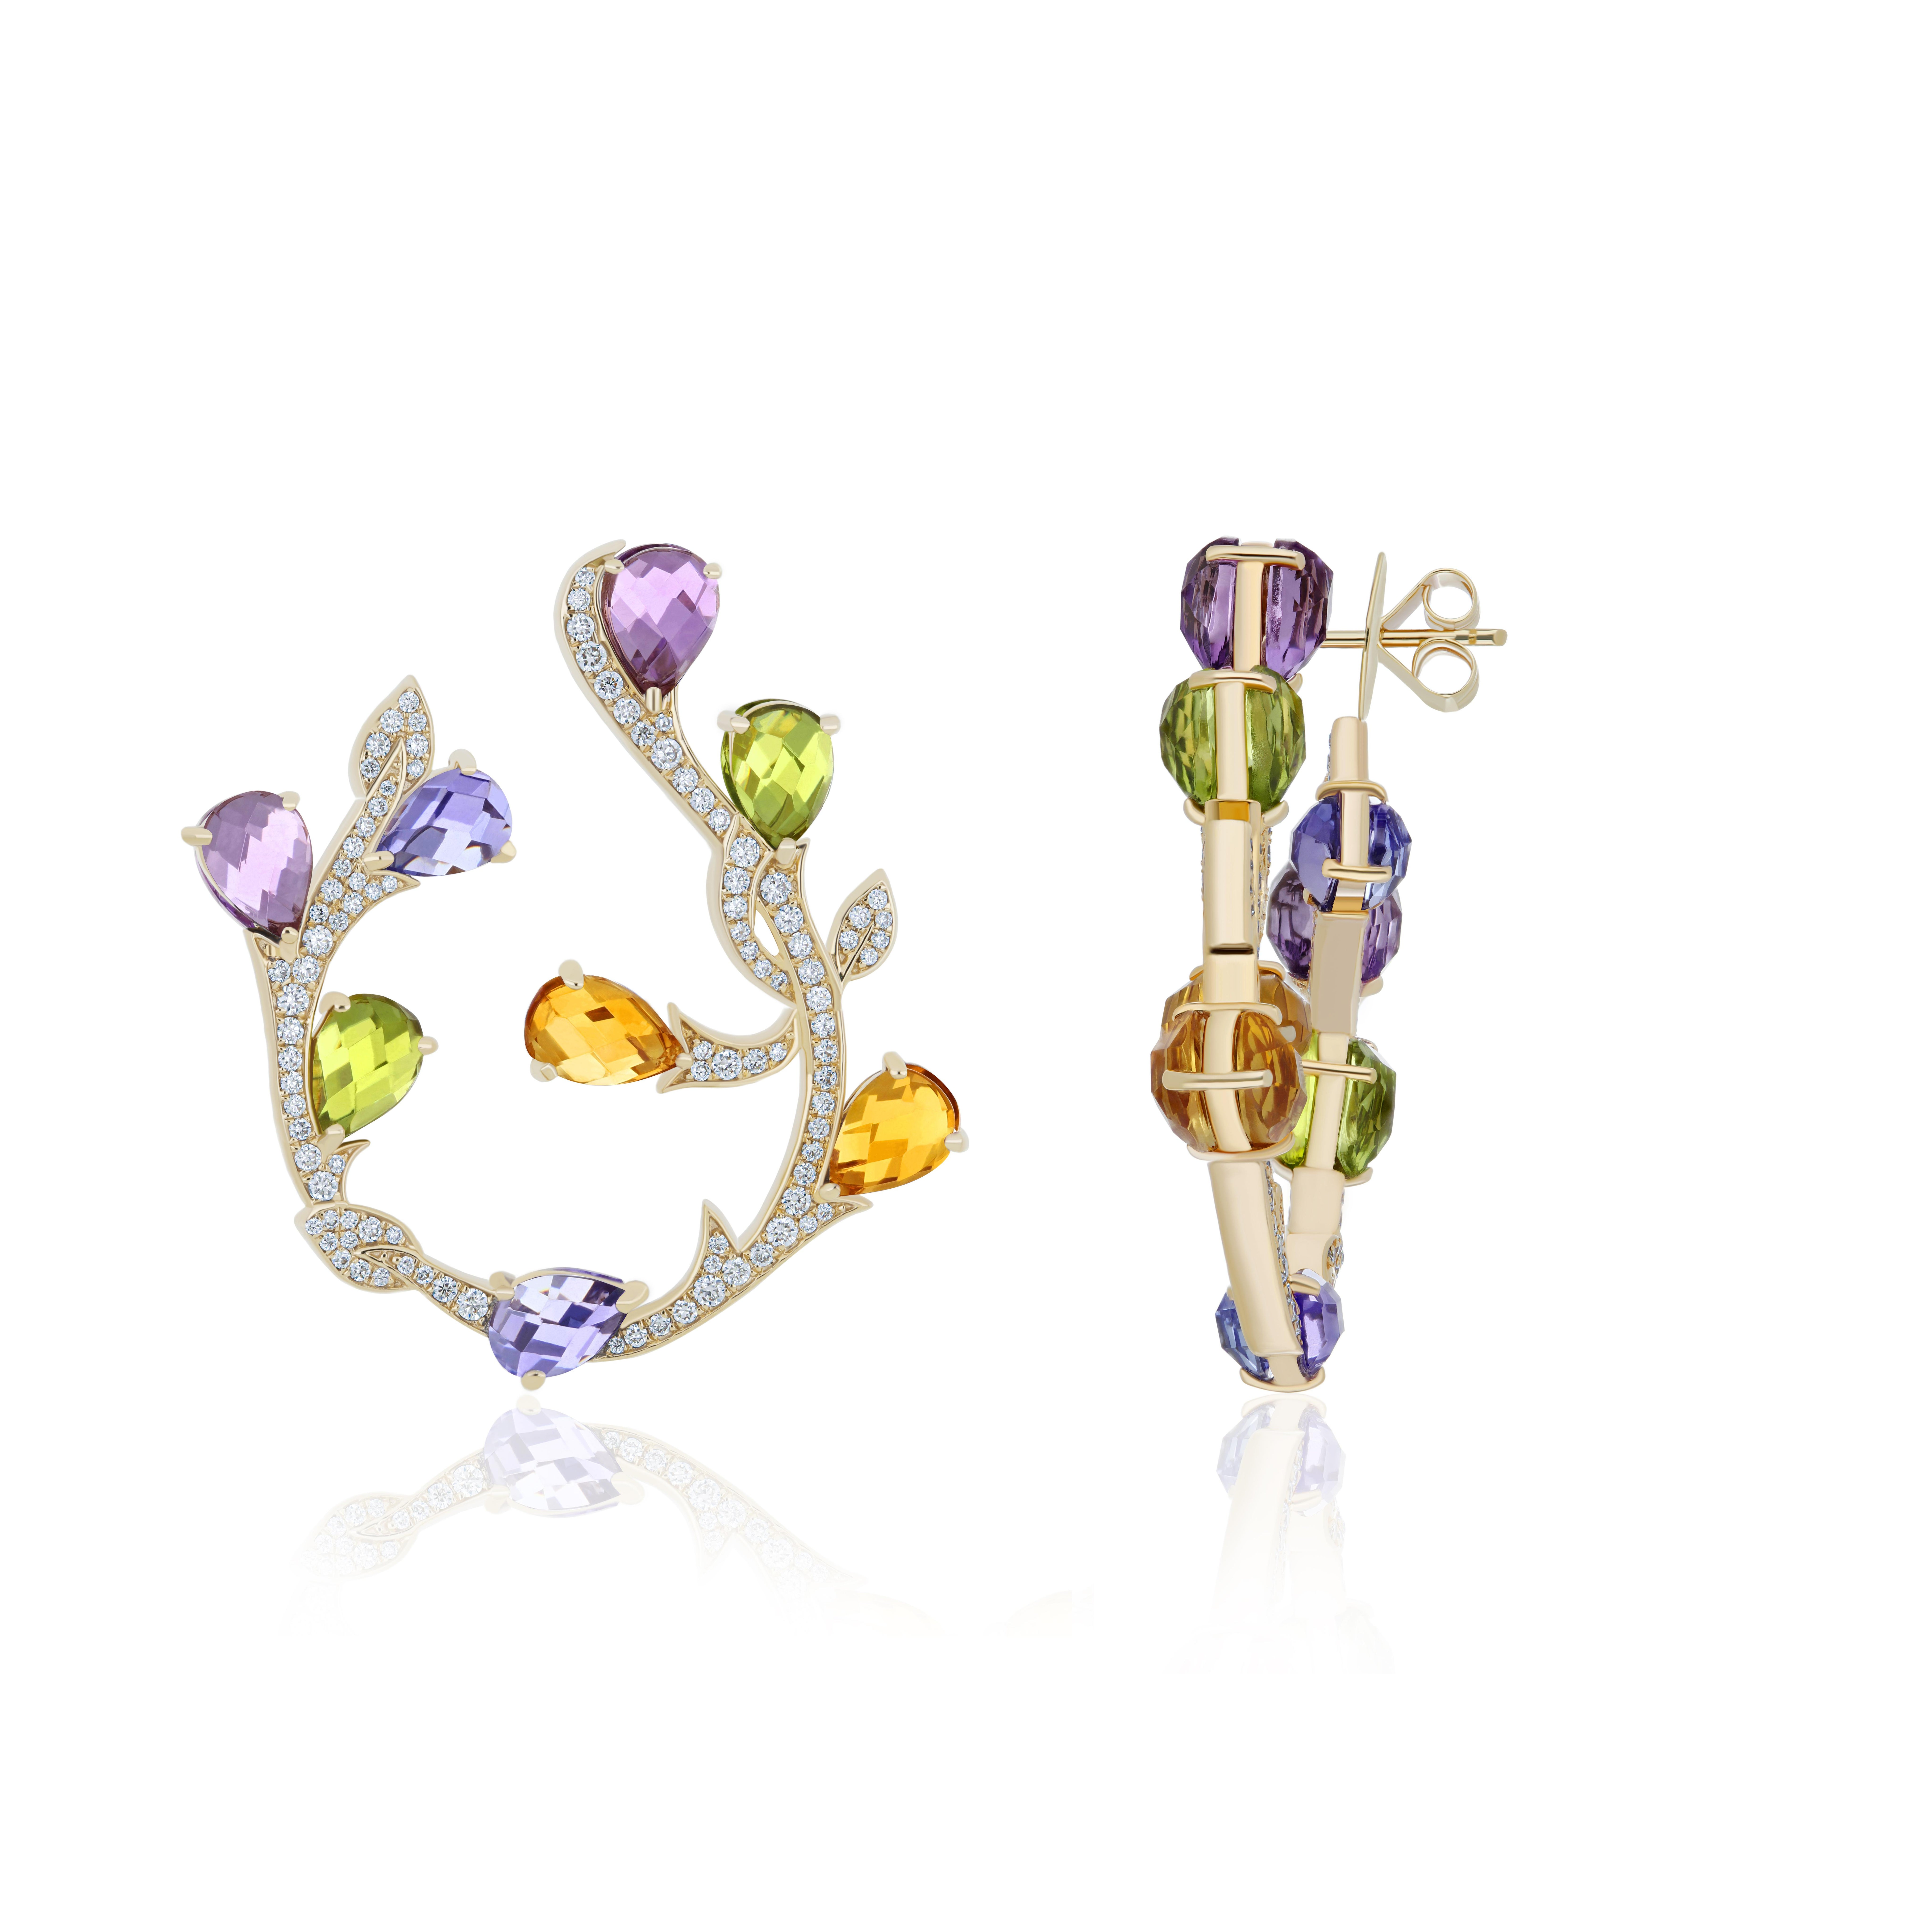 Beautiful and Attractive 14K Gold Gemstone Studded Earrings for Women,  with 19.9 Cts (total Carat weight) Natural Gemstones  consisting of Amethyst, Citrine, Peridot, Tanzanite in FTC  Pear Shape accented with micro pave Diamonds, weighing approx.